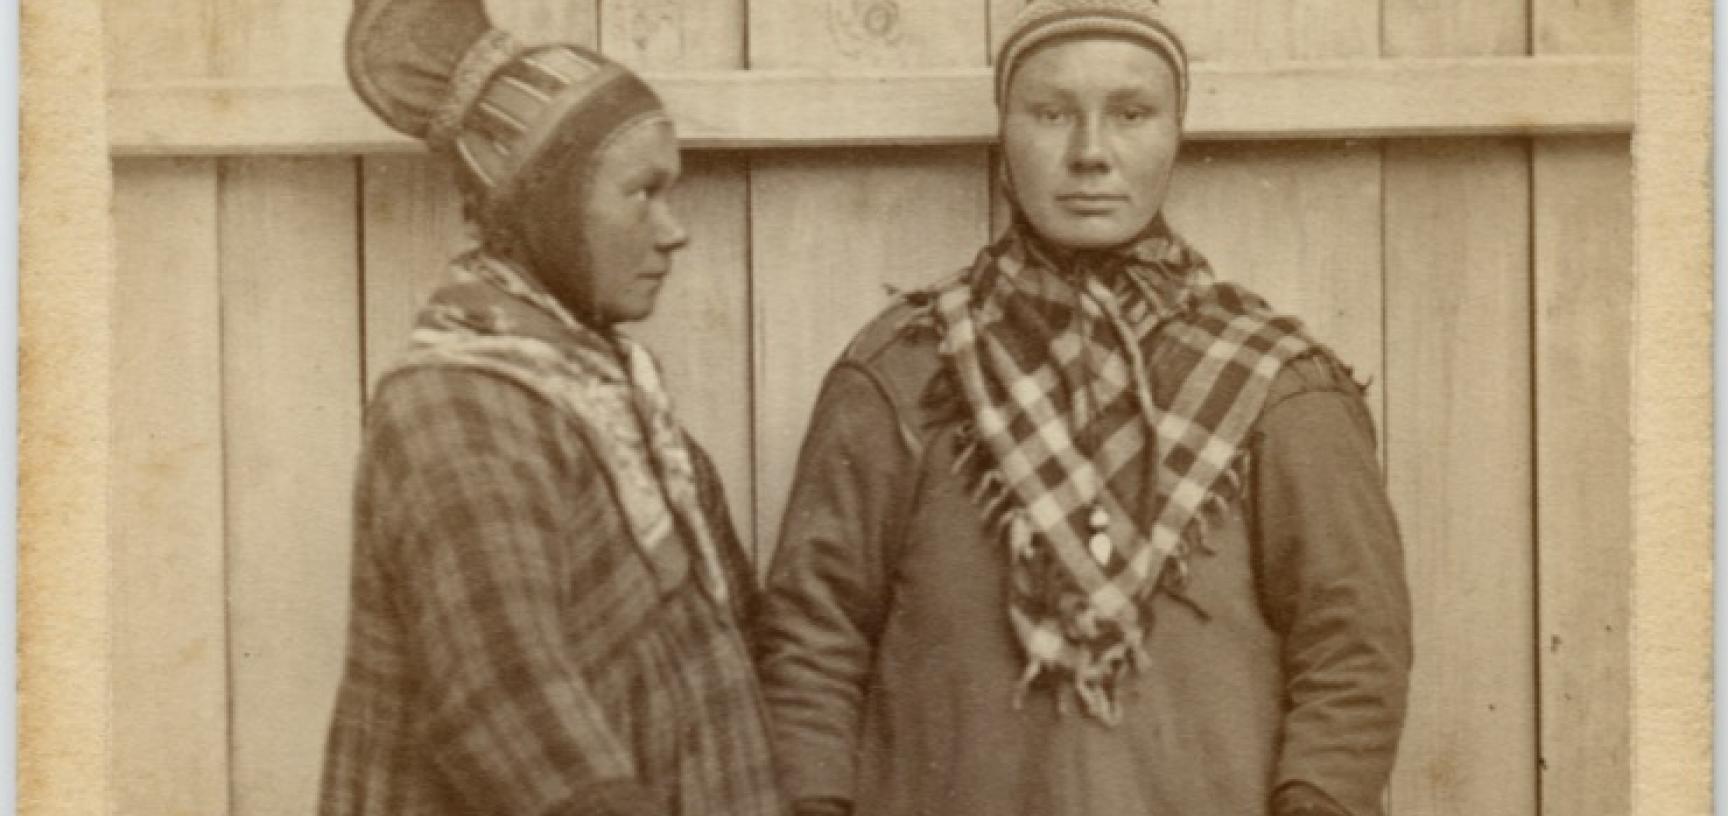 Portrait of two Saami women, standing, wearing distinctive hats. Photographer unknown; carte de visite issued by Braekstad & Co. Trondheim, Norway. Circa 1870s. (Copyright Pitt Rivers Museum, University of Oxford. Accession Number: 1941.8.41)